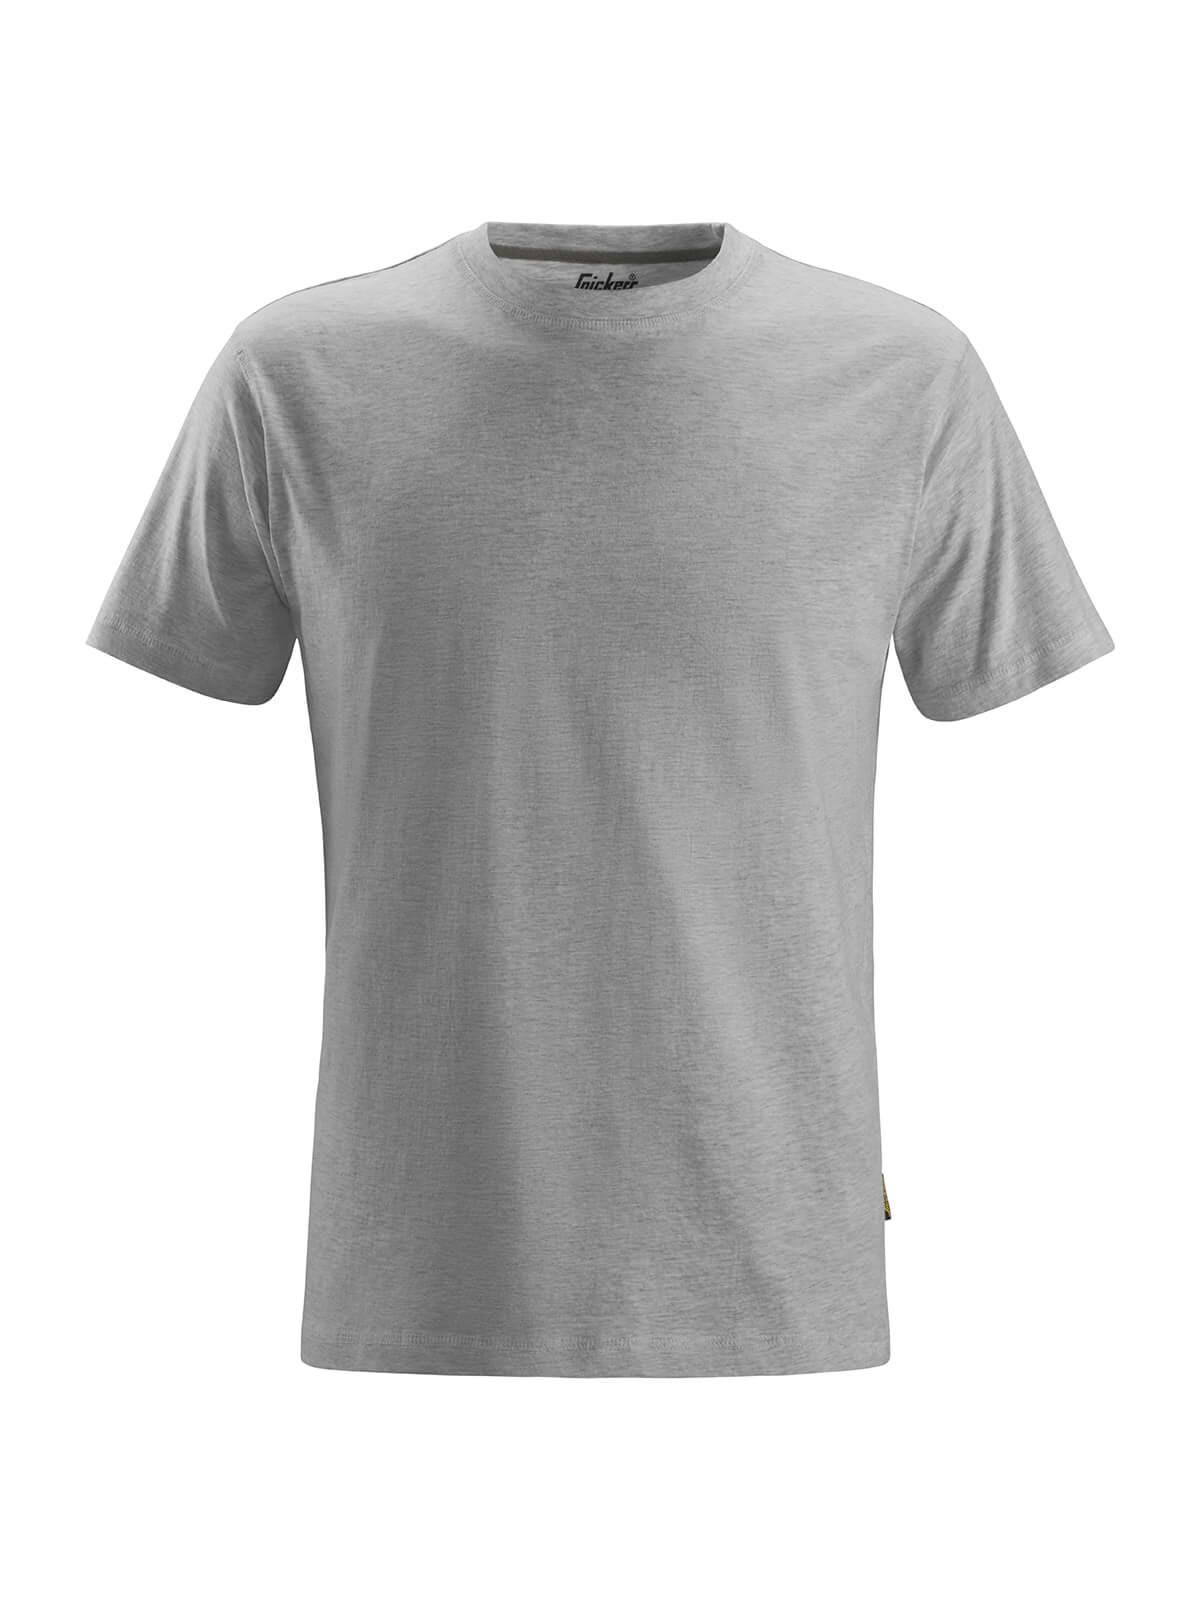 Snickers Classic T-Shirt - Grey, Large